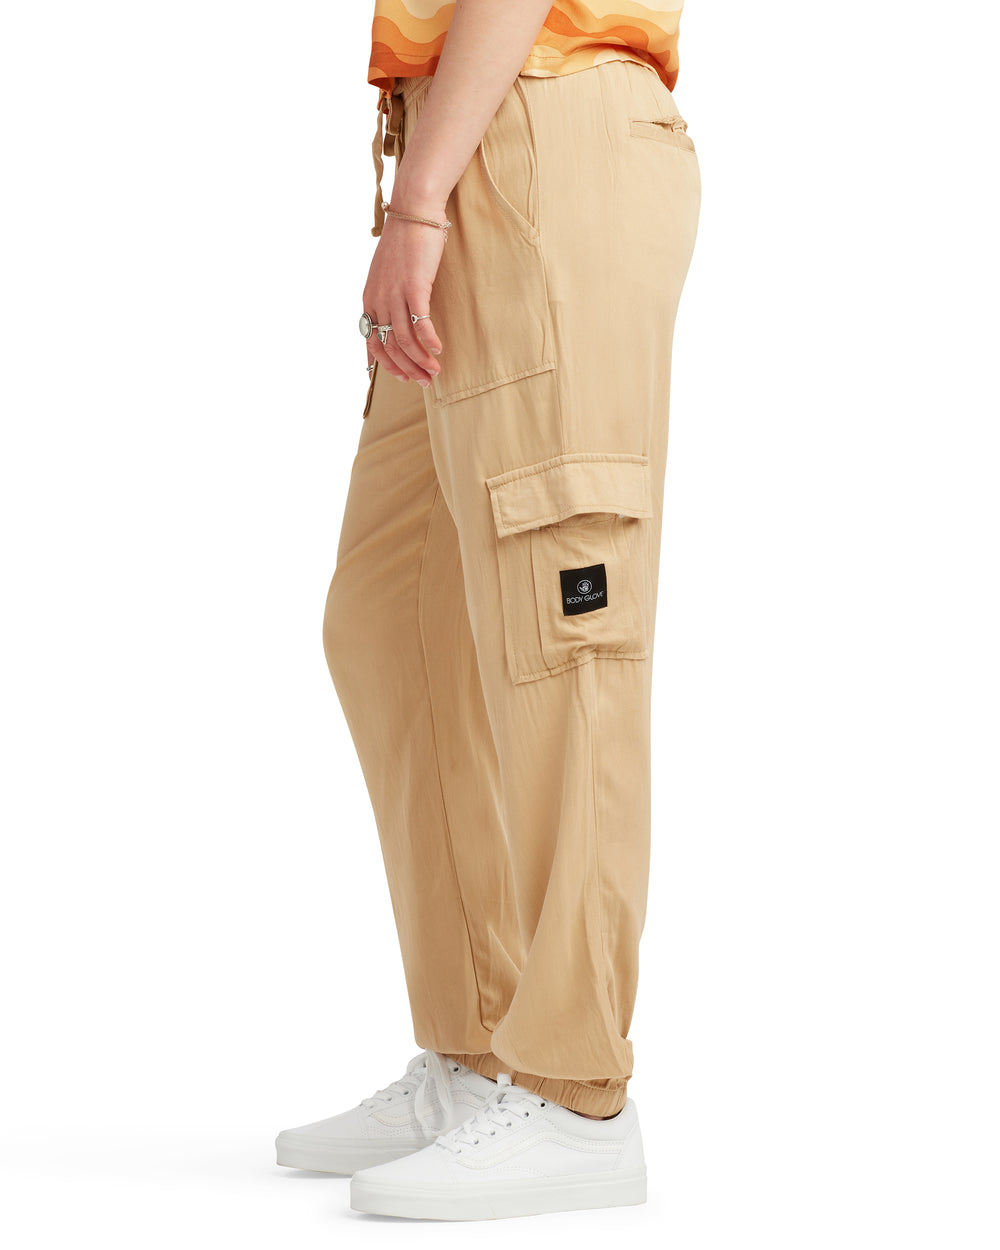 Myly Mid-Rise Cargo Jogger Pant - Tan